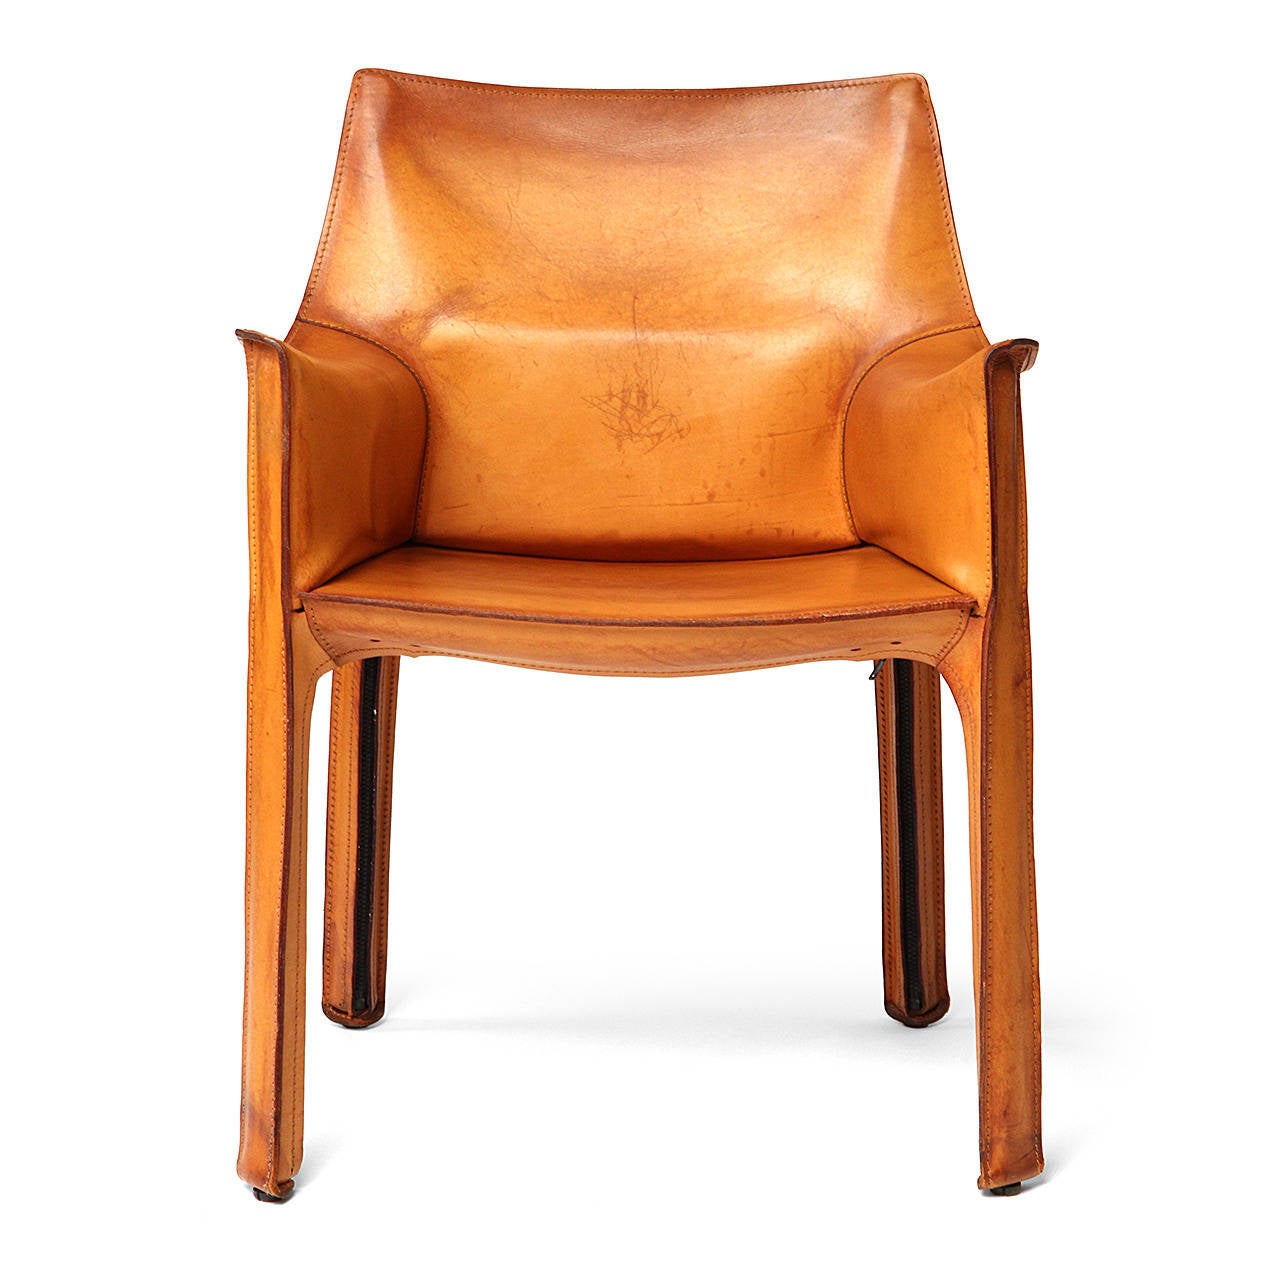 An Italian Mid-Century Modern armchair designed by Mario Bellini featuring handstitched natural leather upholstery wrapped over internal steel frame. Manufactured by Cassina in Italy, circa 1977.